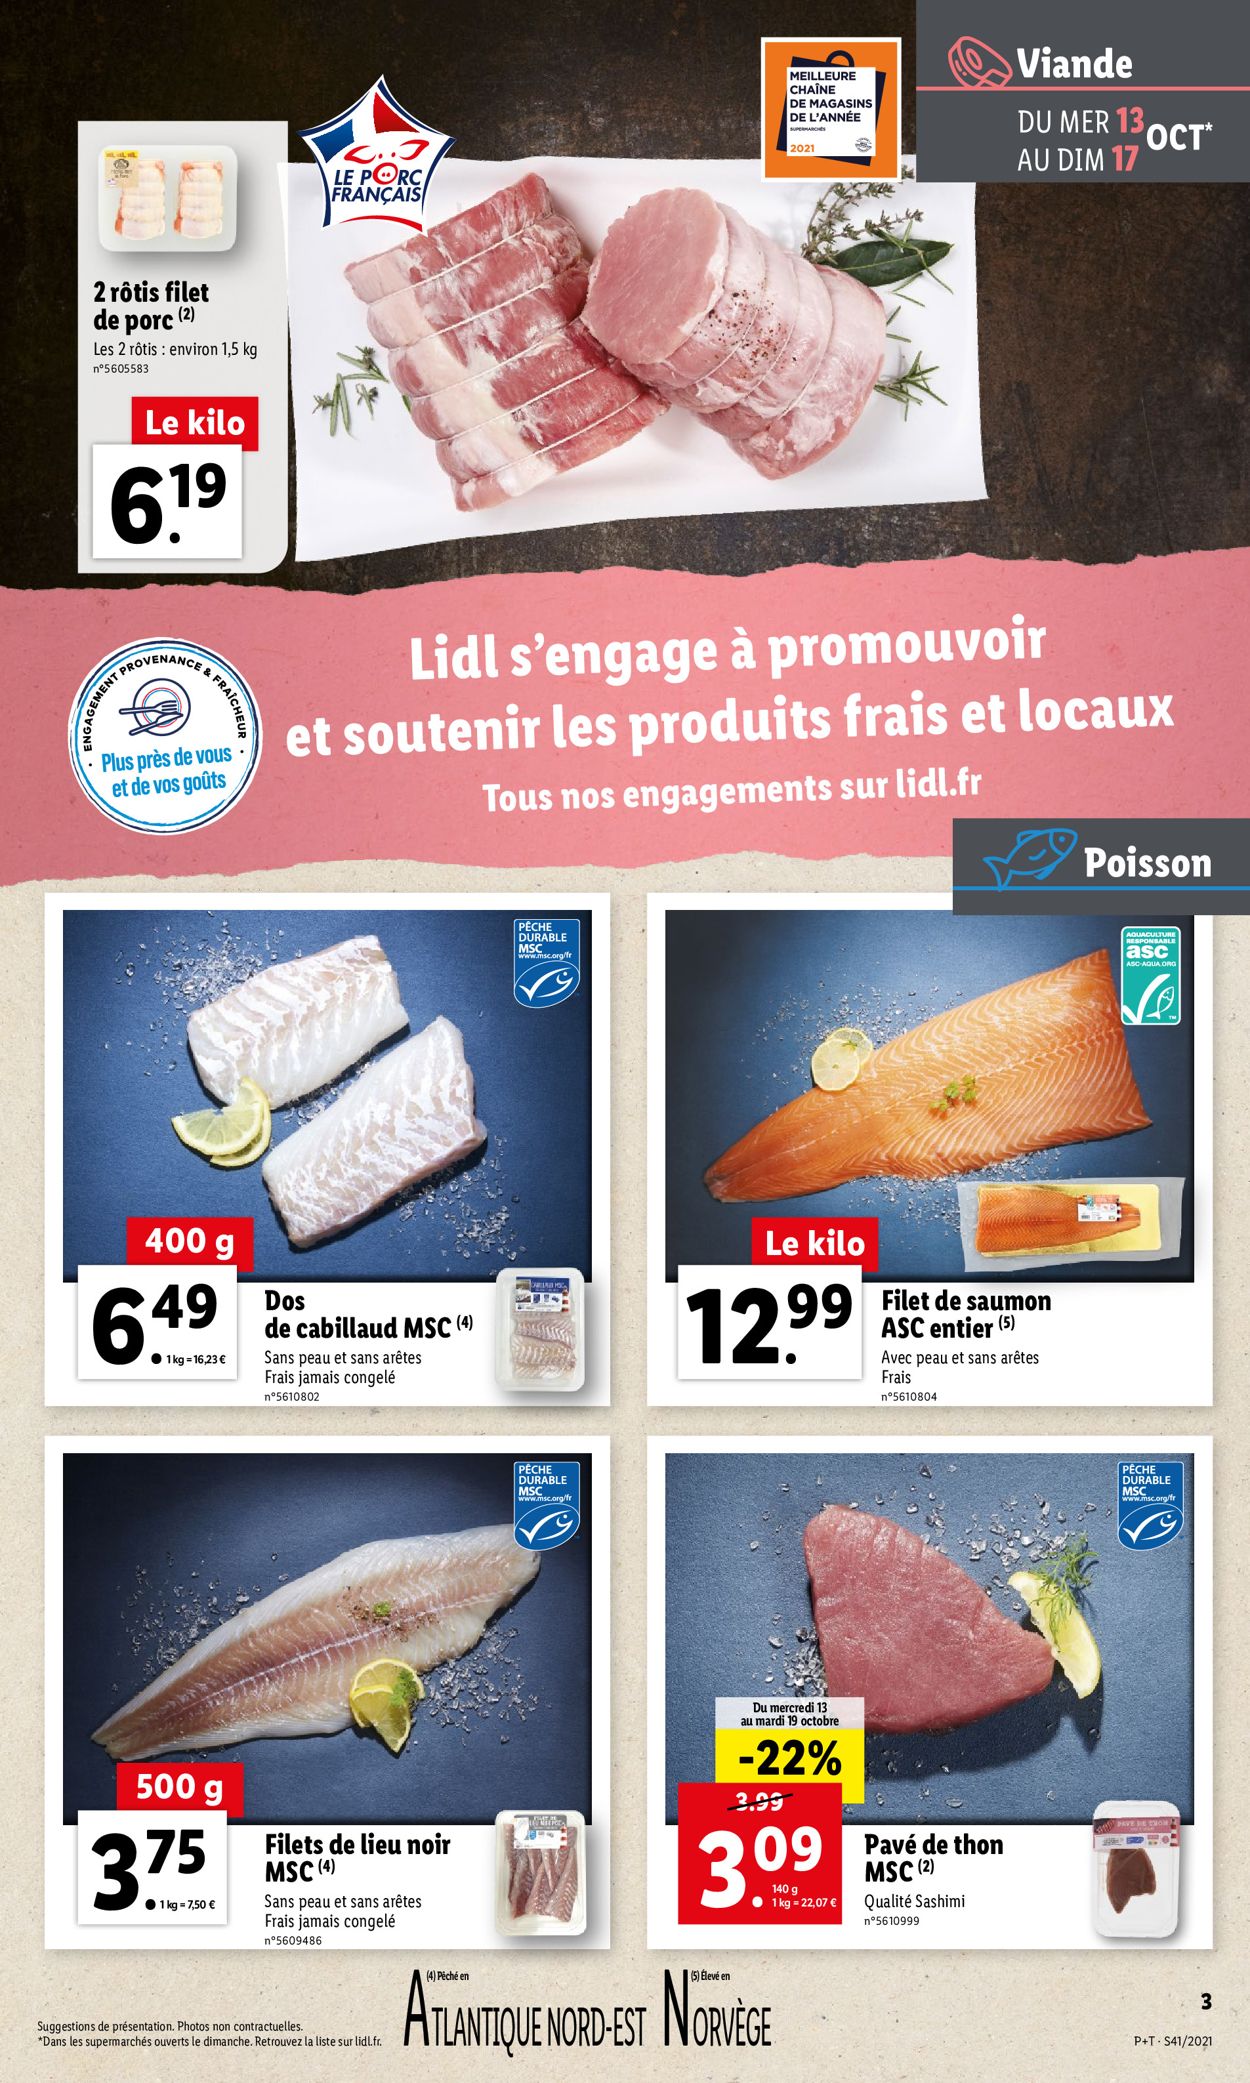 Lidl Catalogue - 13.10-19.10.2021 (Page 3)